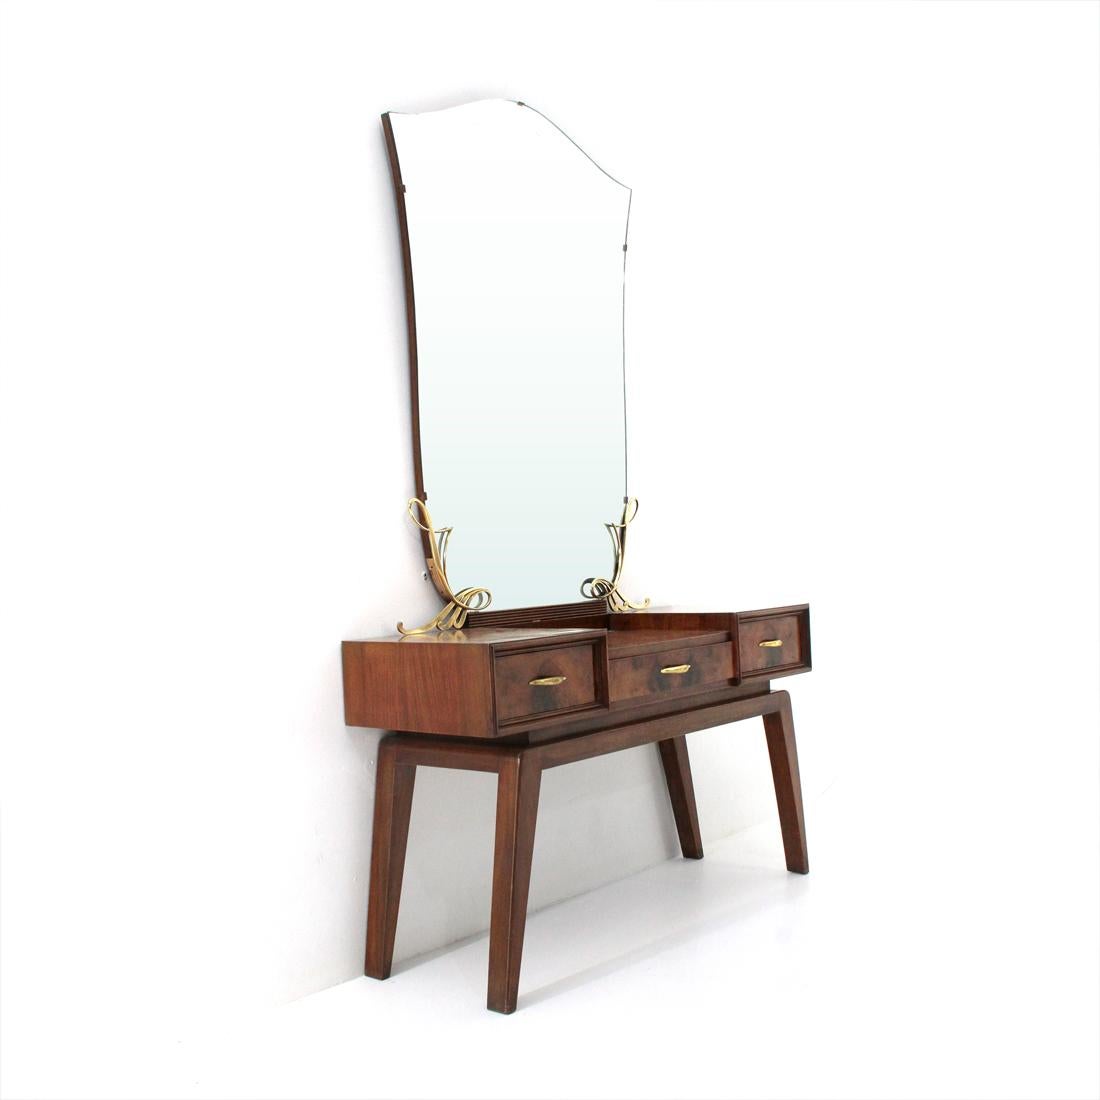 Vanity desk of Italian craftsmanship produced in the 50s.
Legs in solid wood.
Structure in veneered wood.
Three drawers with front panel veneered with briar and brass handles.
Mirror with brass decorations.
Good general conditions, some signs